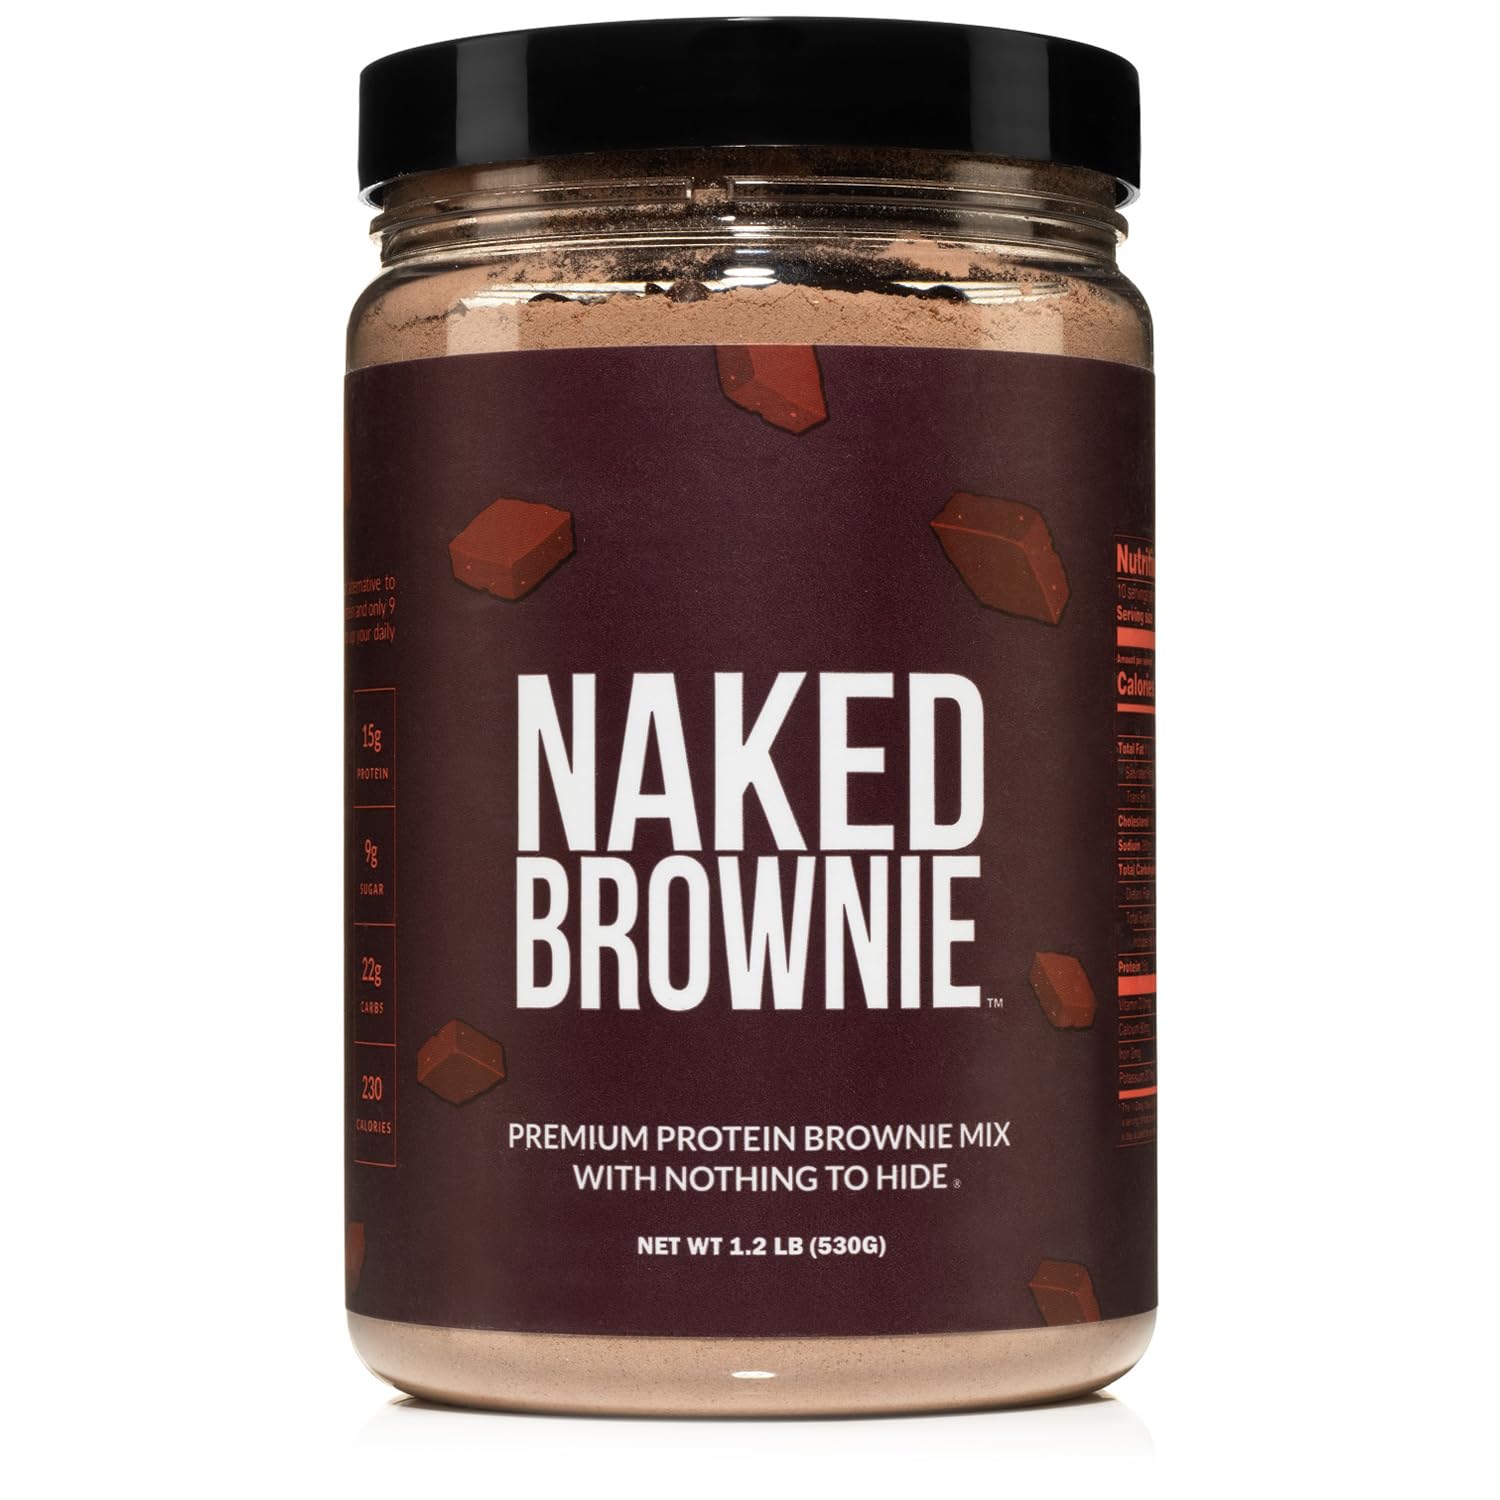 Naked Brownie - High Protein Brownie Mix, No Artificial Sweeteners, 15g Protein, Only 9g Sugar, Gluten Free, Non-GMO, No Soy - 1.2 LB